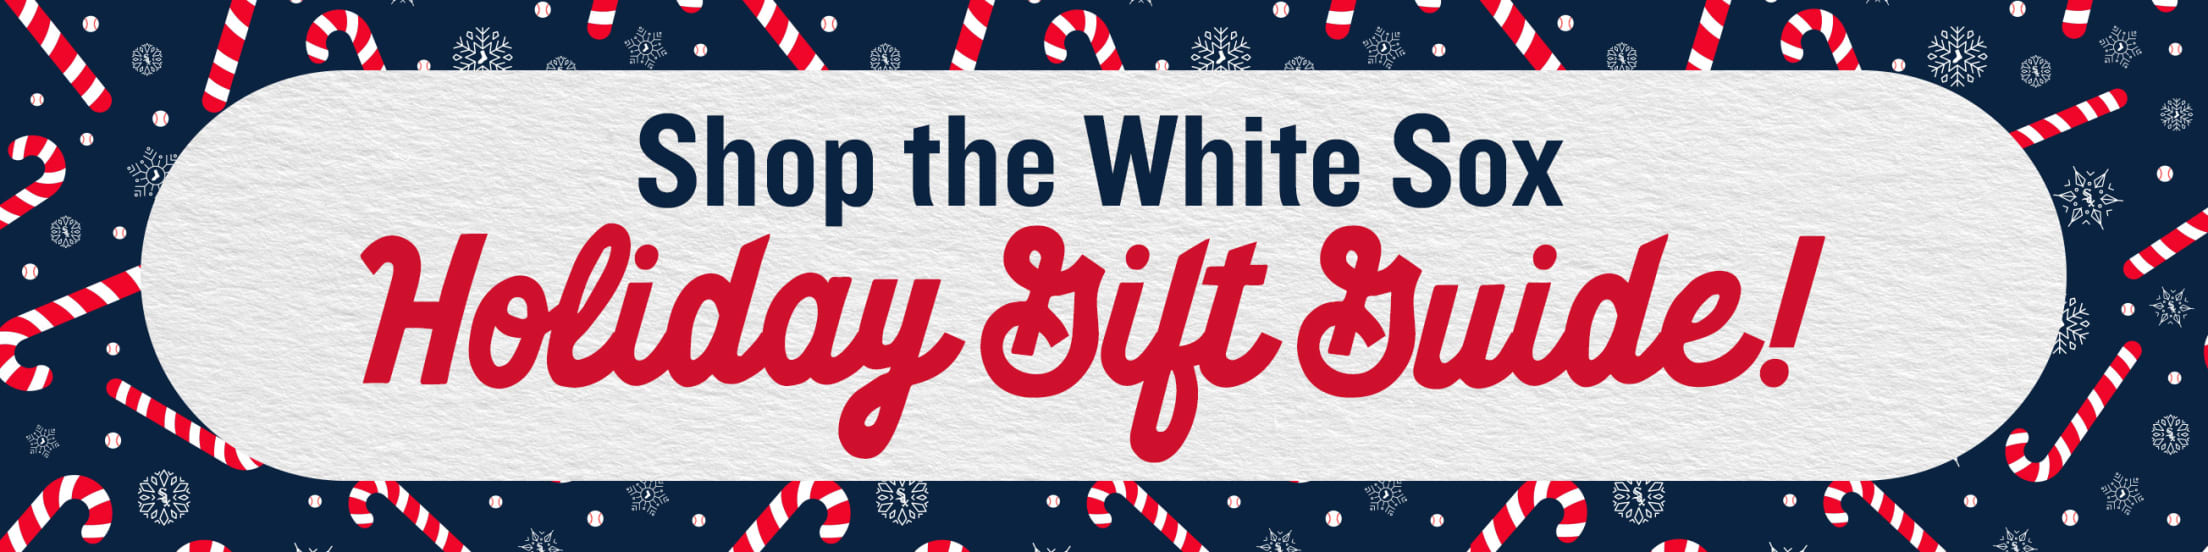 White Sox Gift Guide